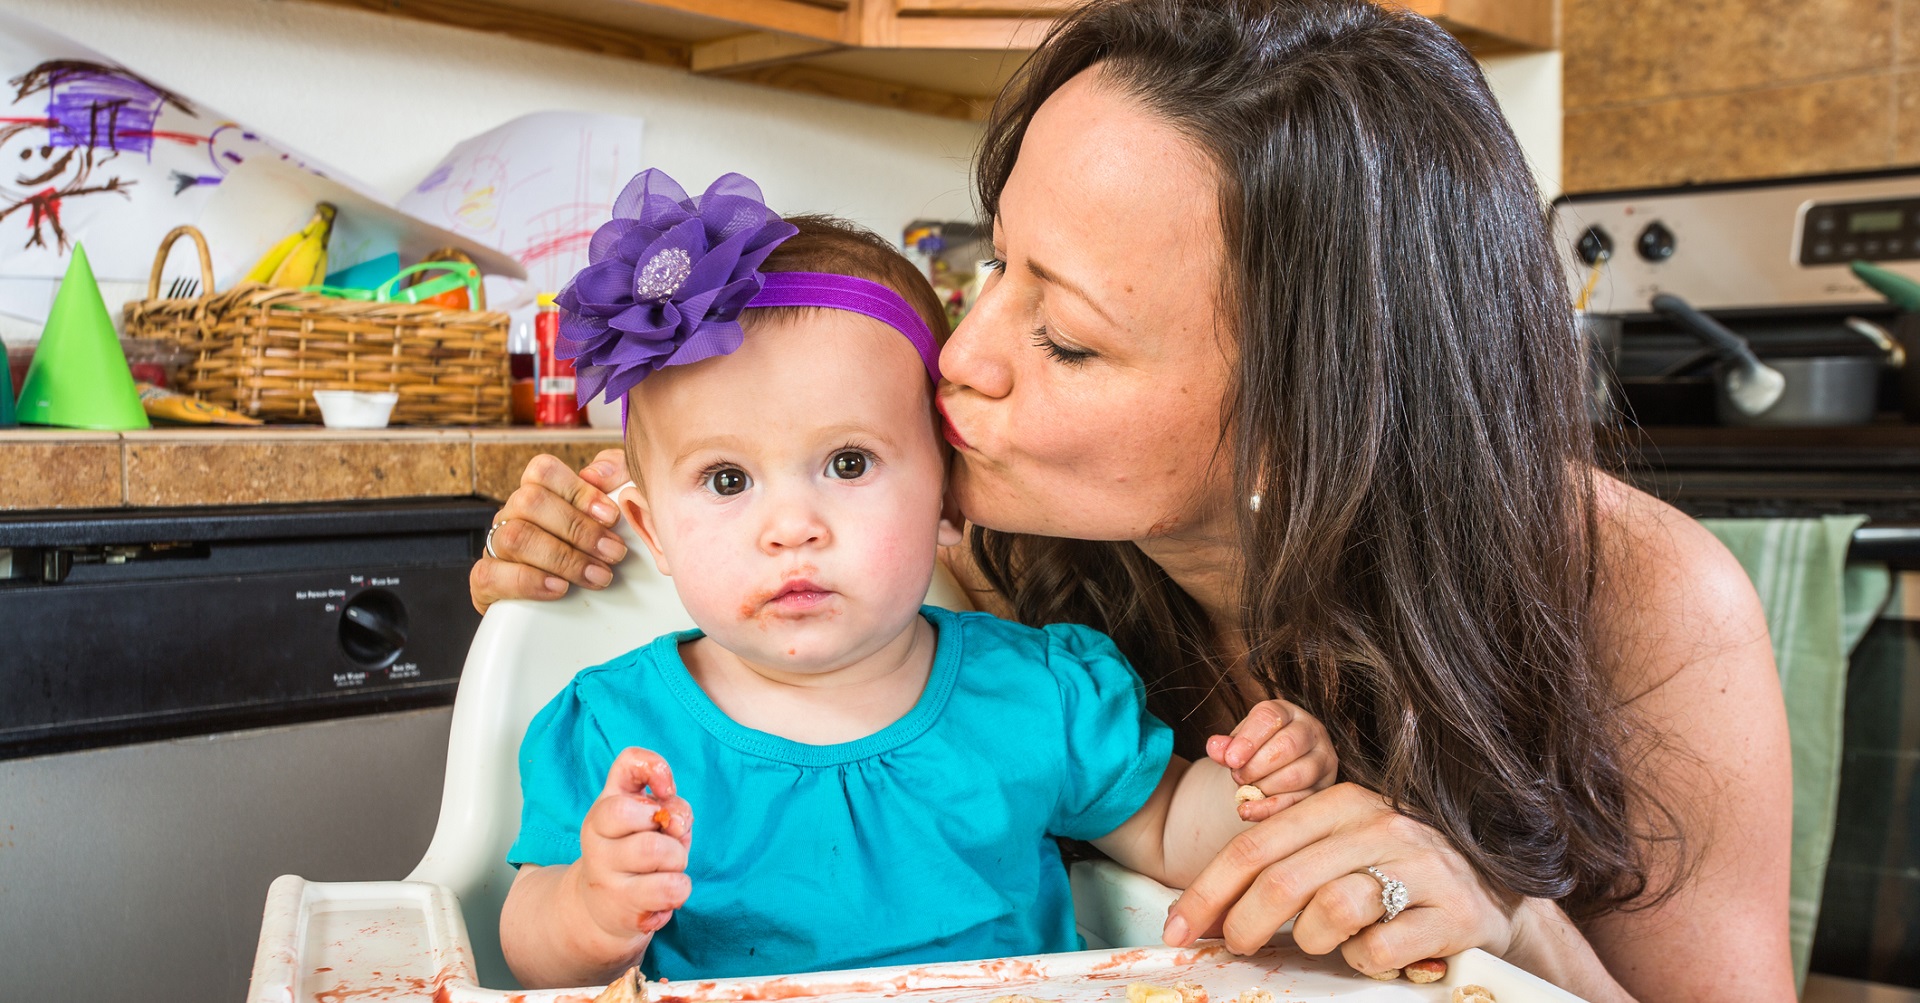 mother kissing baby that has made a mess with food